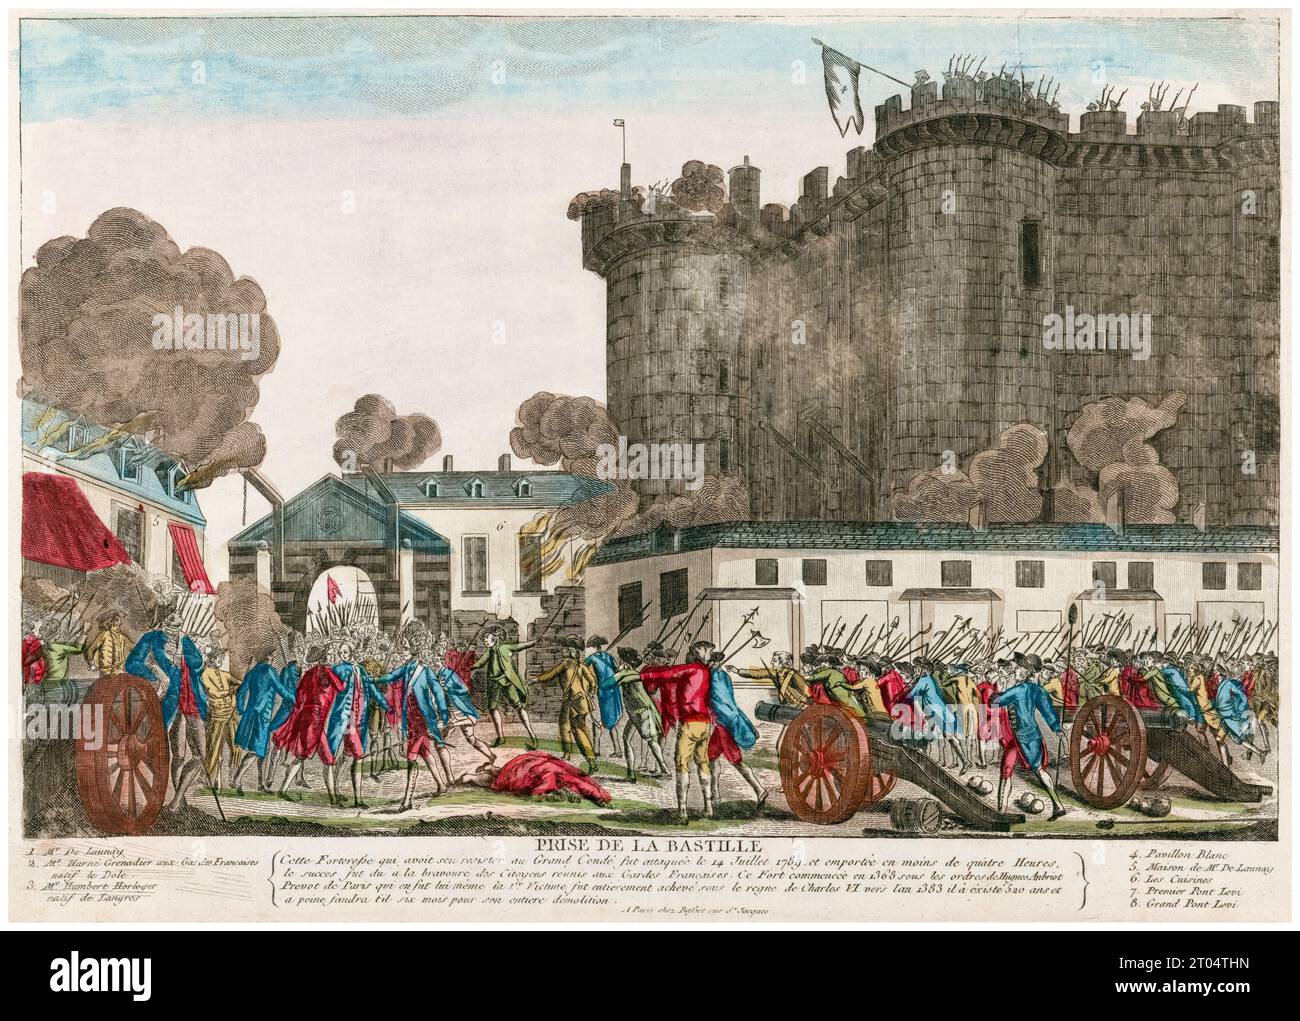 The arrest of Bernard René Jourdan, Marquis de Launay at the Storming of the Bastille, July 14th 1789, French revolution, hand coloured engraving, 1789 Stock Photo